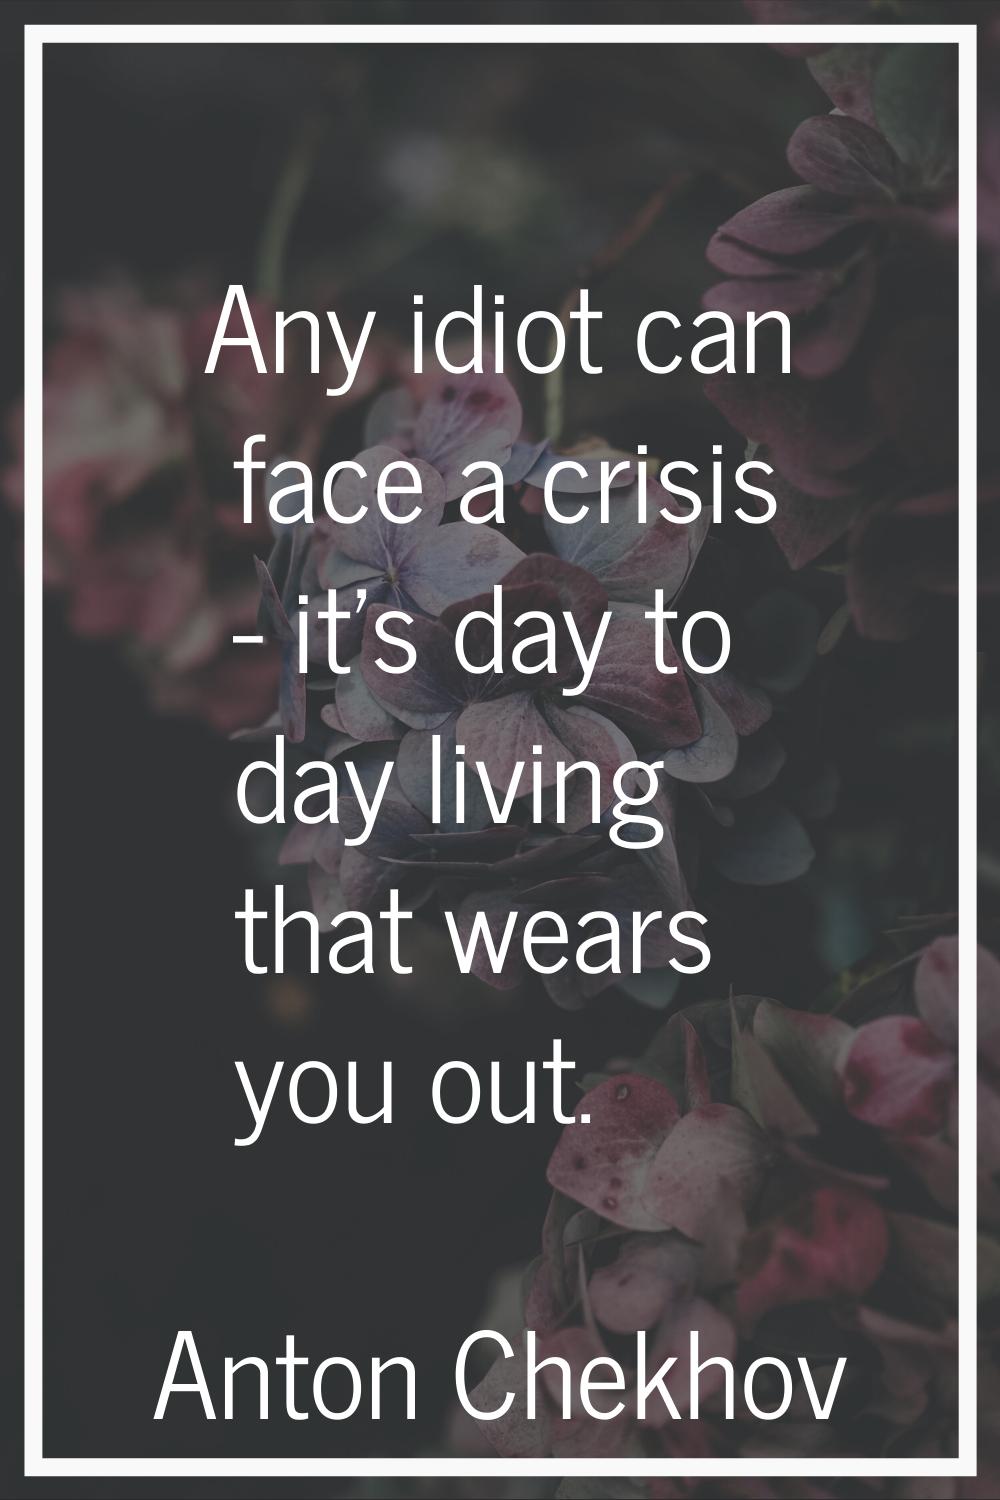 Any idiot can face a crisis - it's day to day living that wears you out.